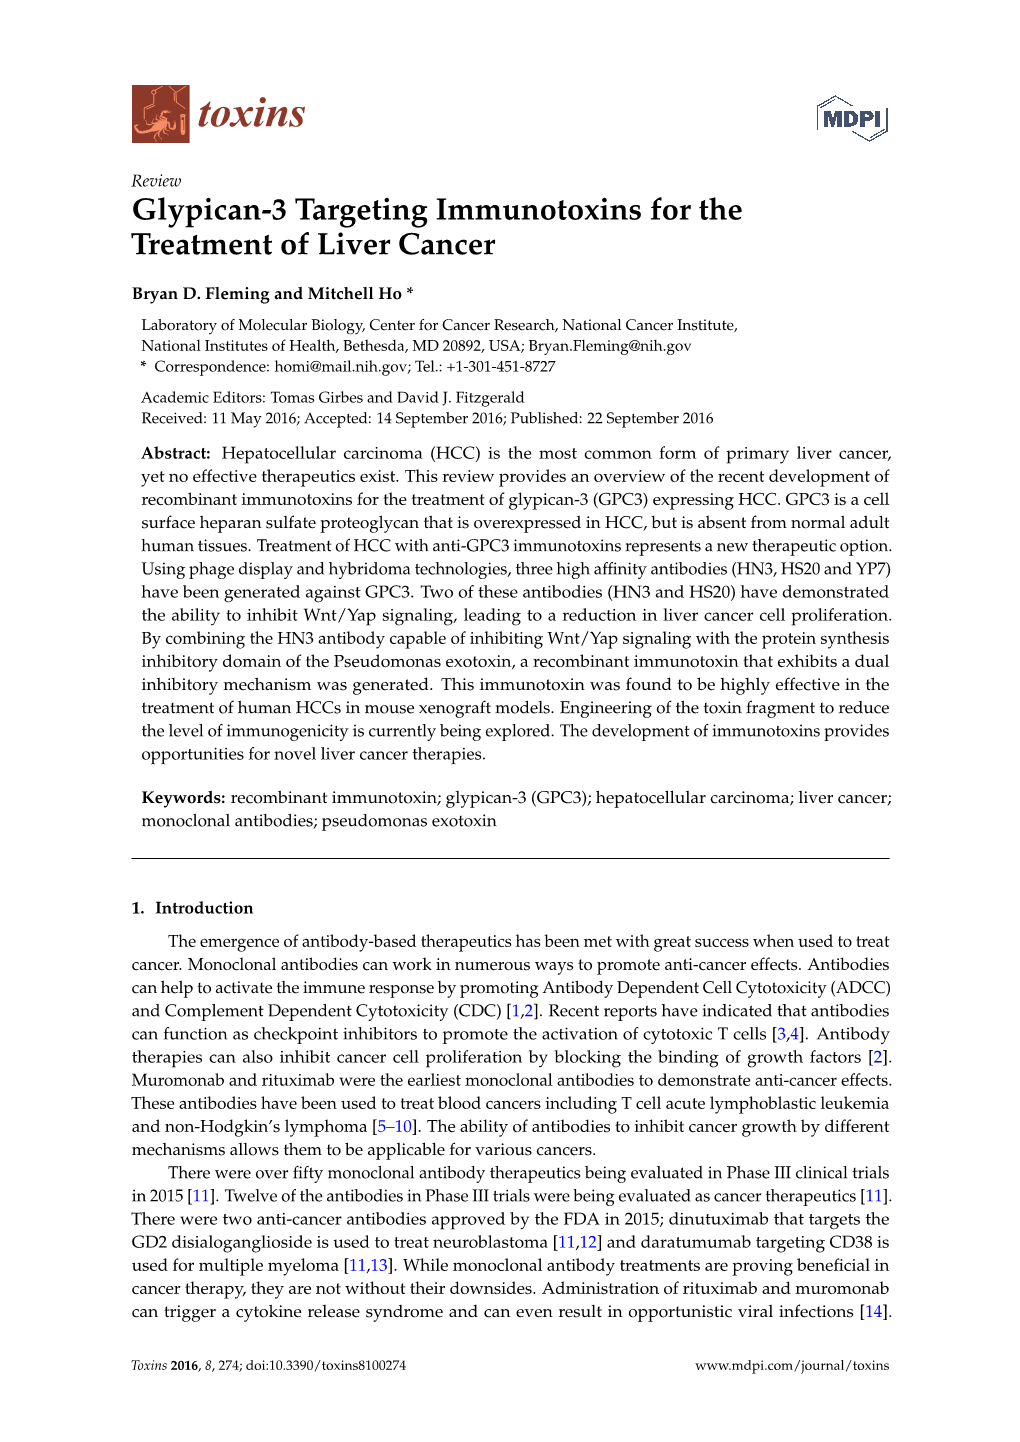 Glypican-3 Targeting Immunotoxins for the Treatment of Liver Cancer